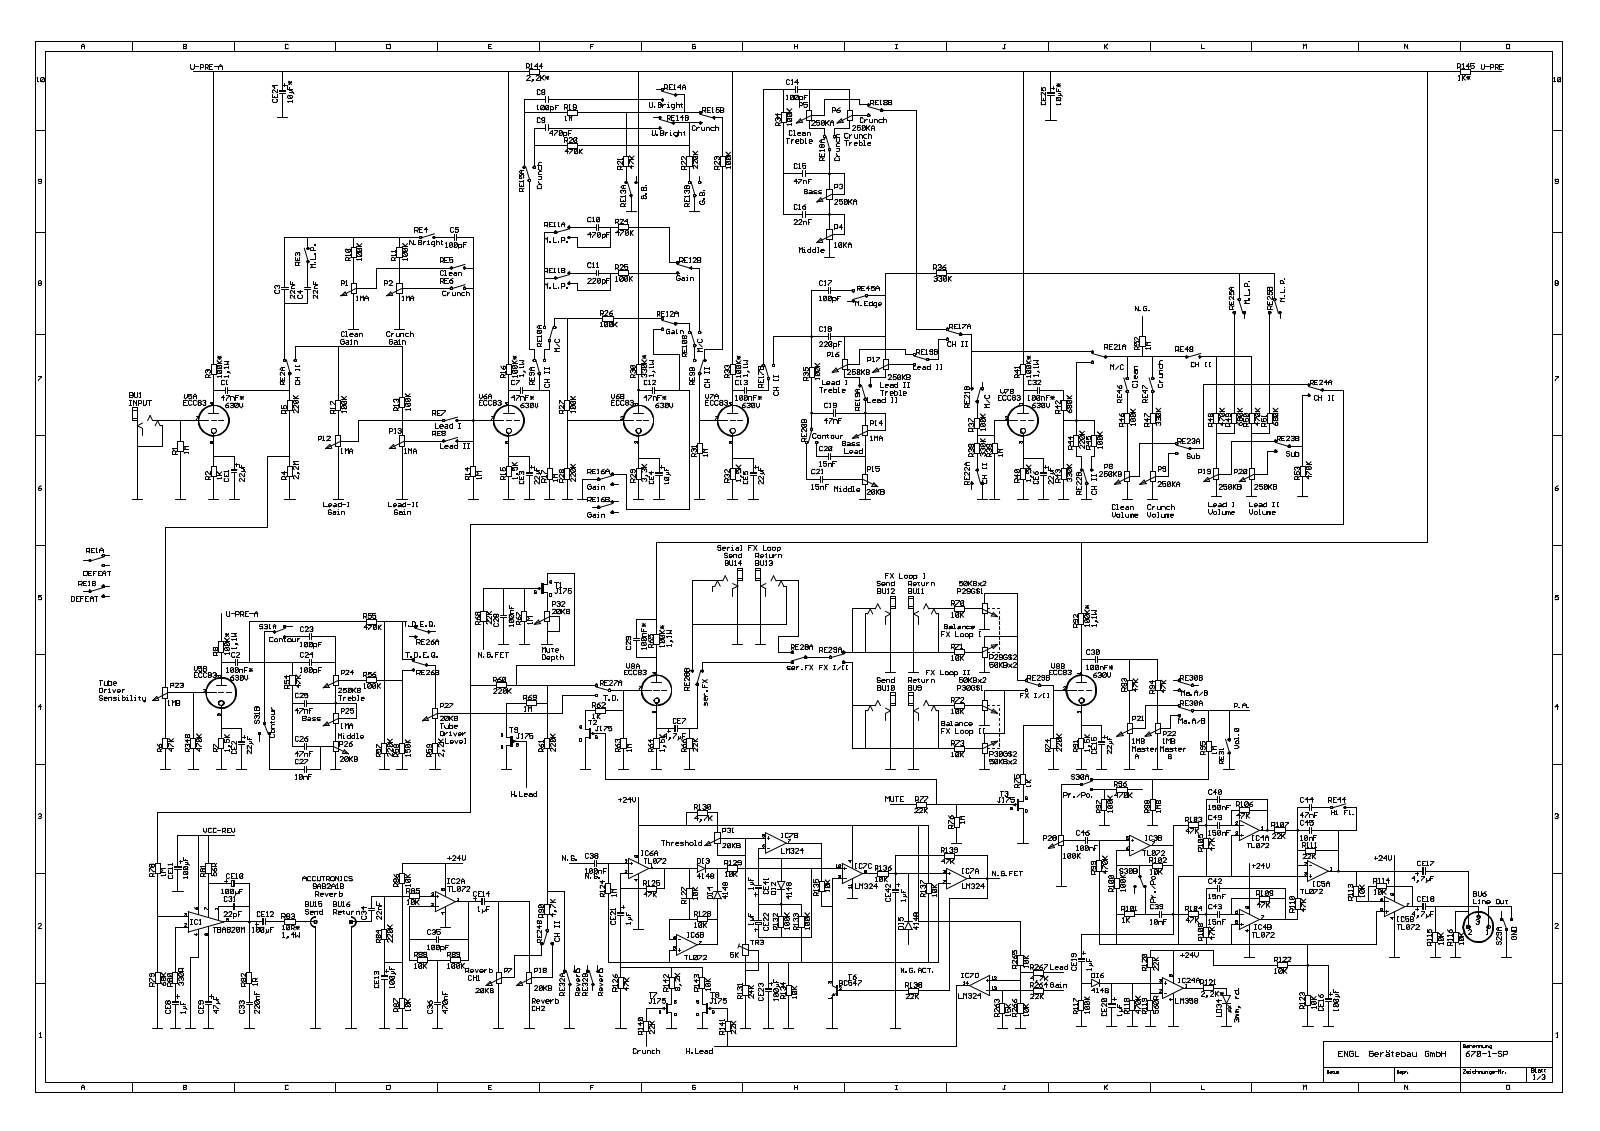 Engl savage special edition schematic